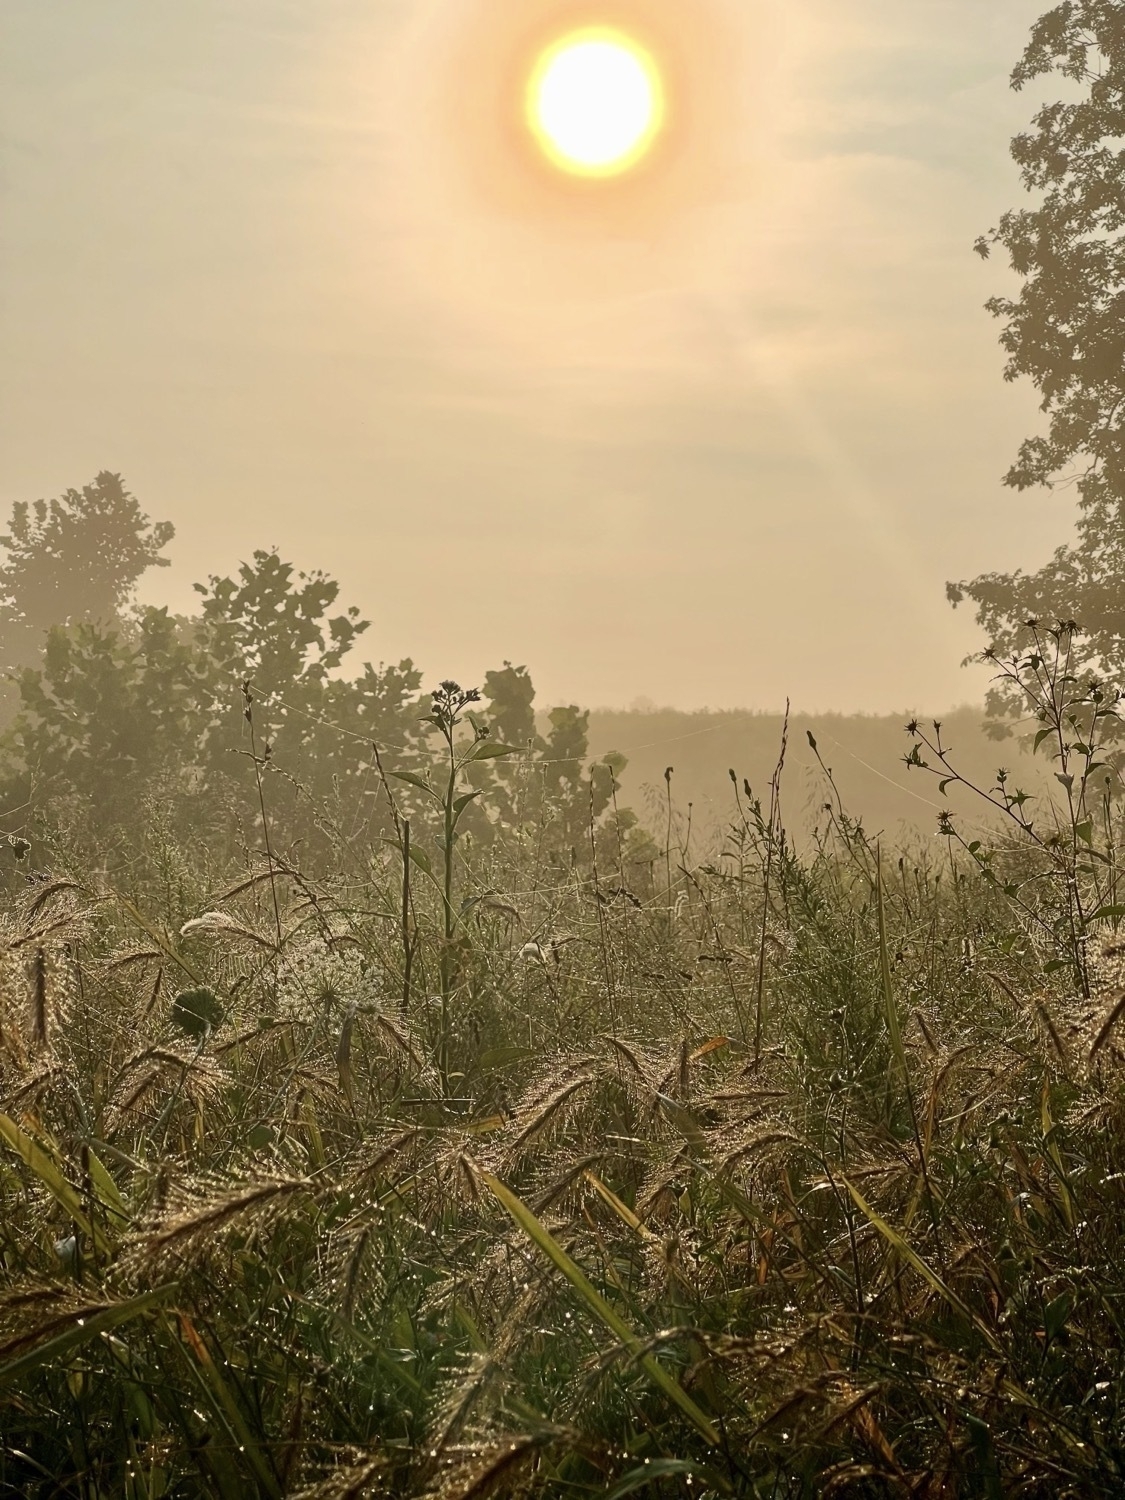 A somewhat foggy field of dew covered grasses and wildflowers is lit by golden morning sun